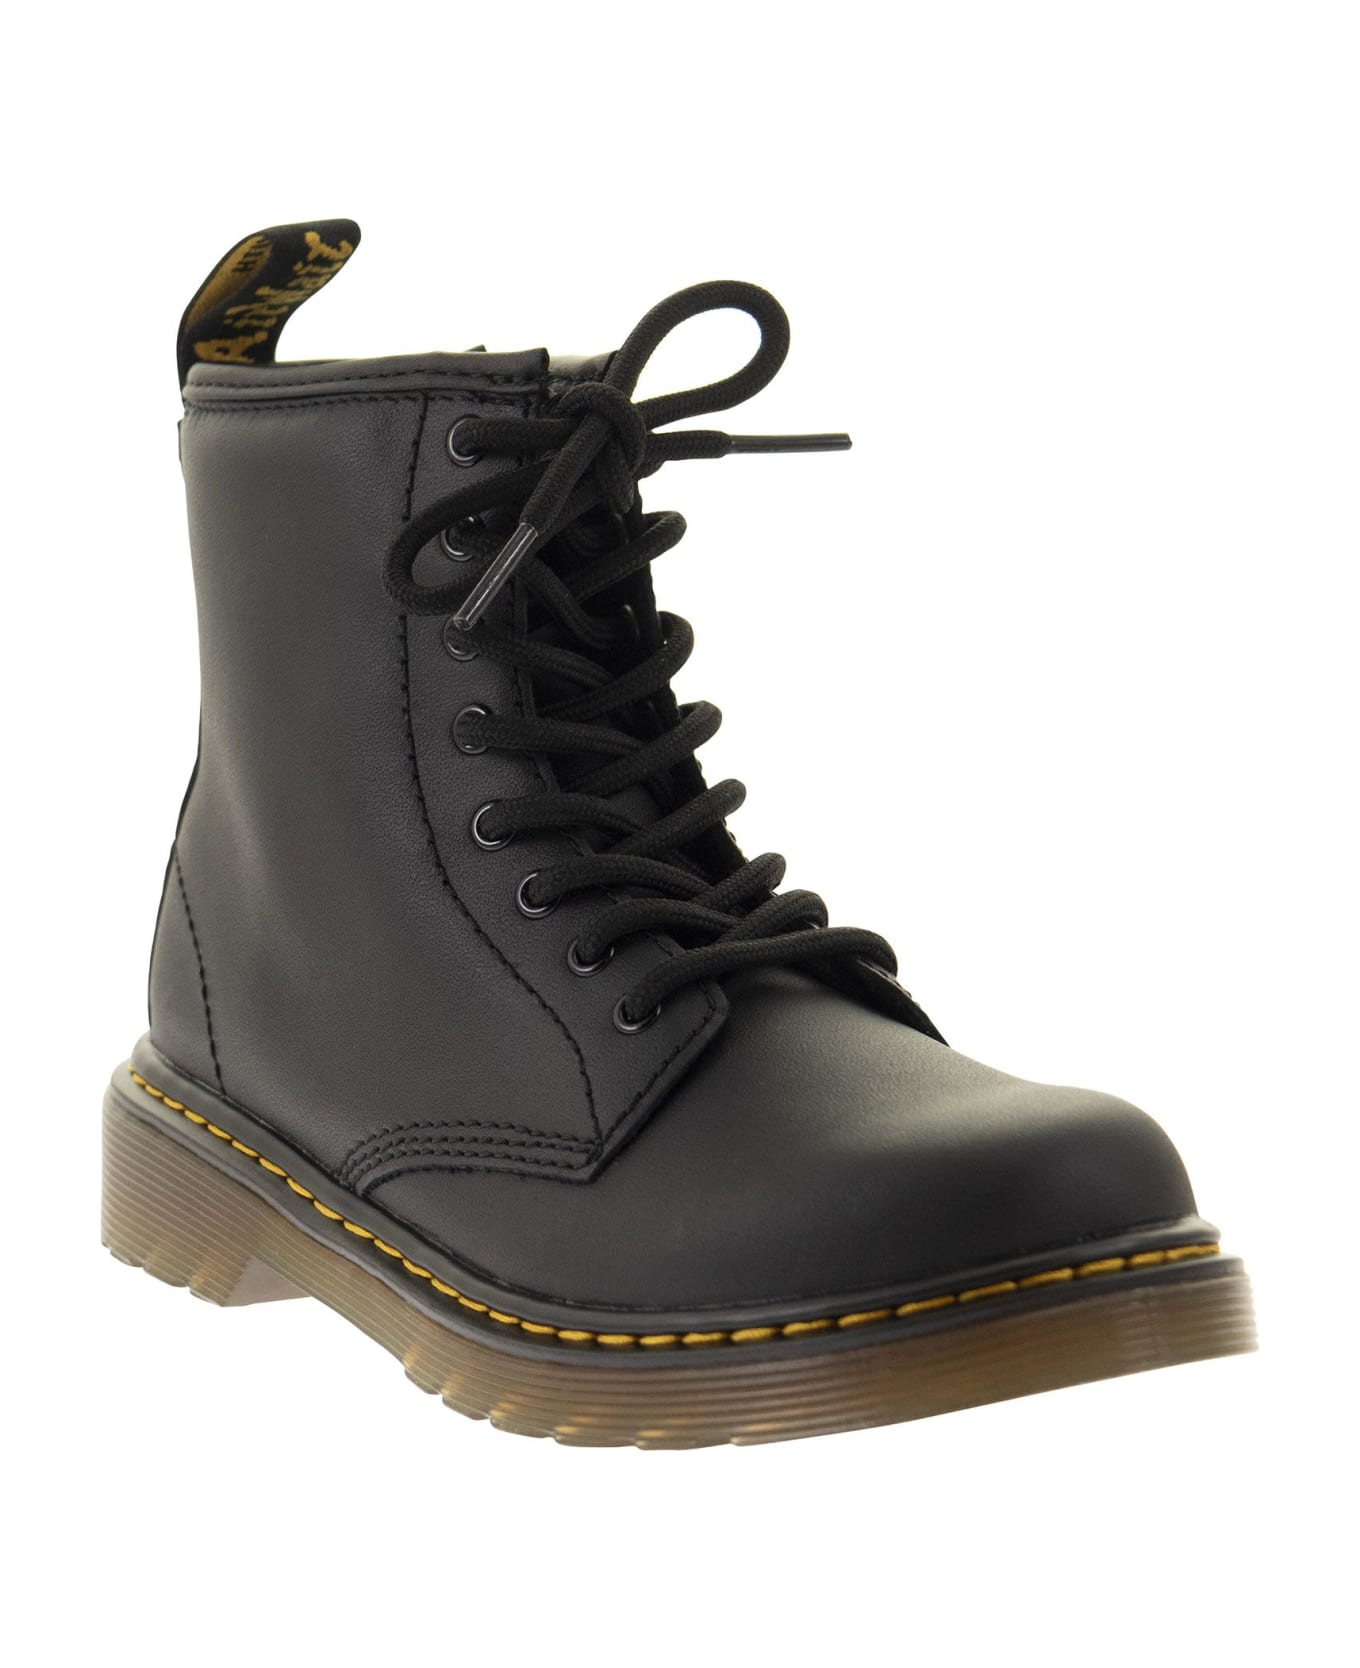 Dr. Martens 8-eye Leather Ankle Boot 1460 - Black シューズ